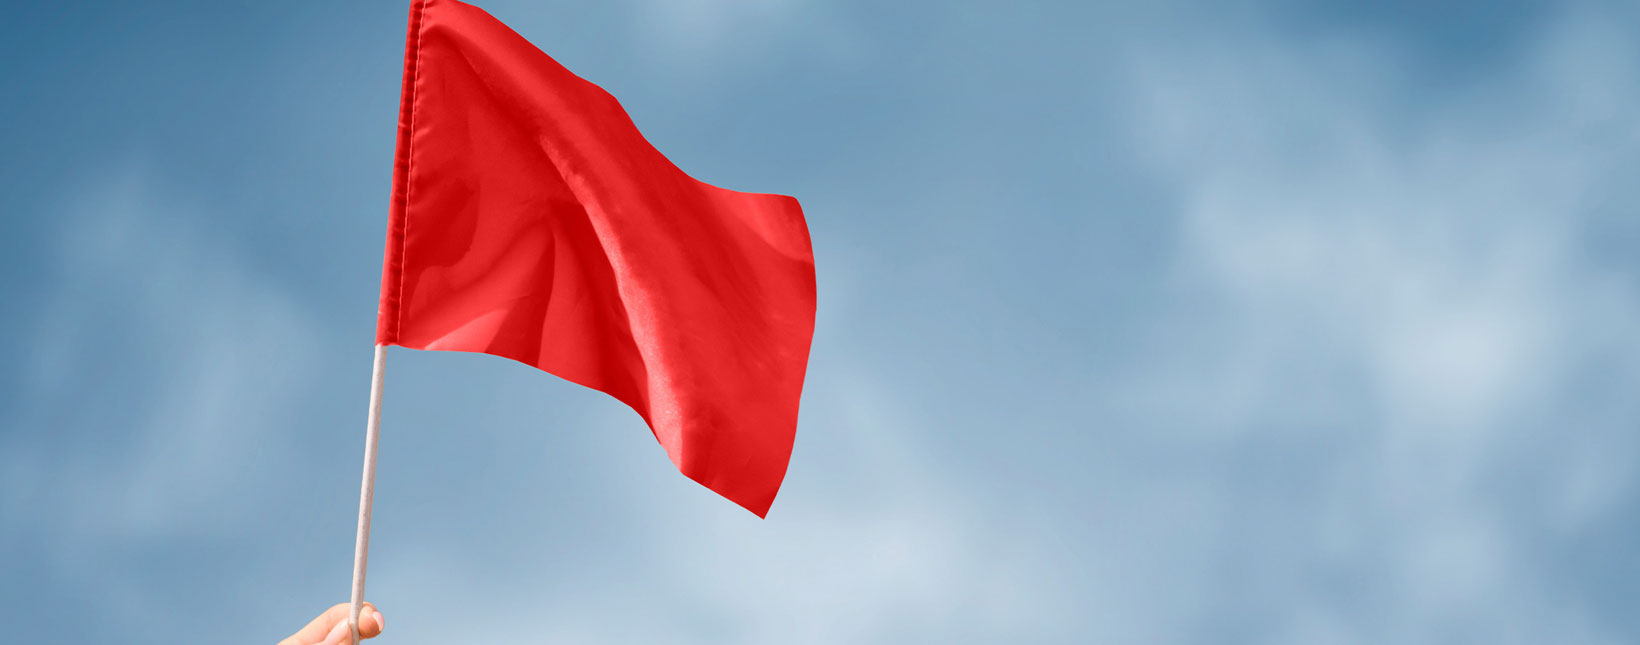 waving a red flag